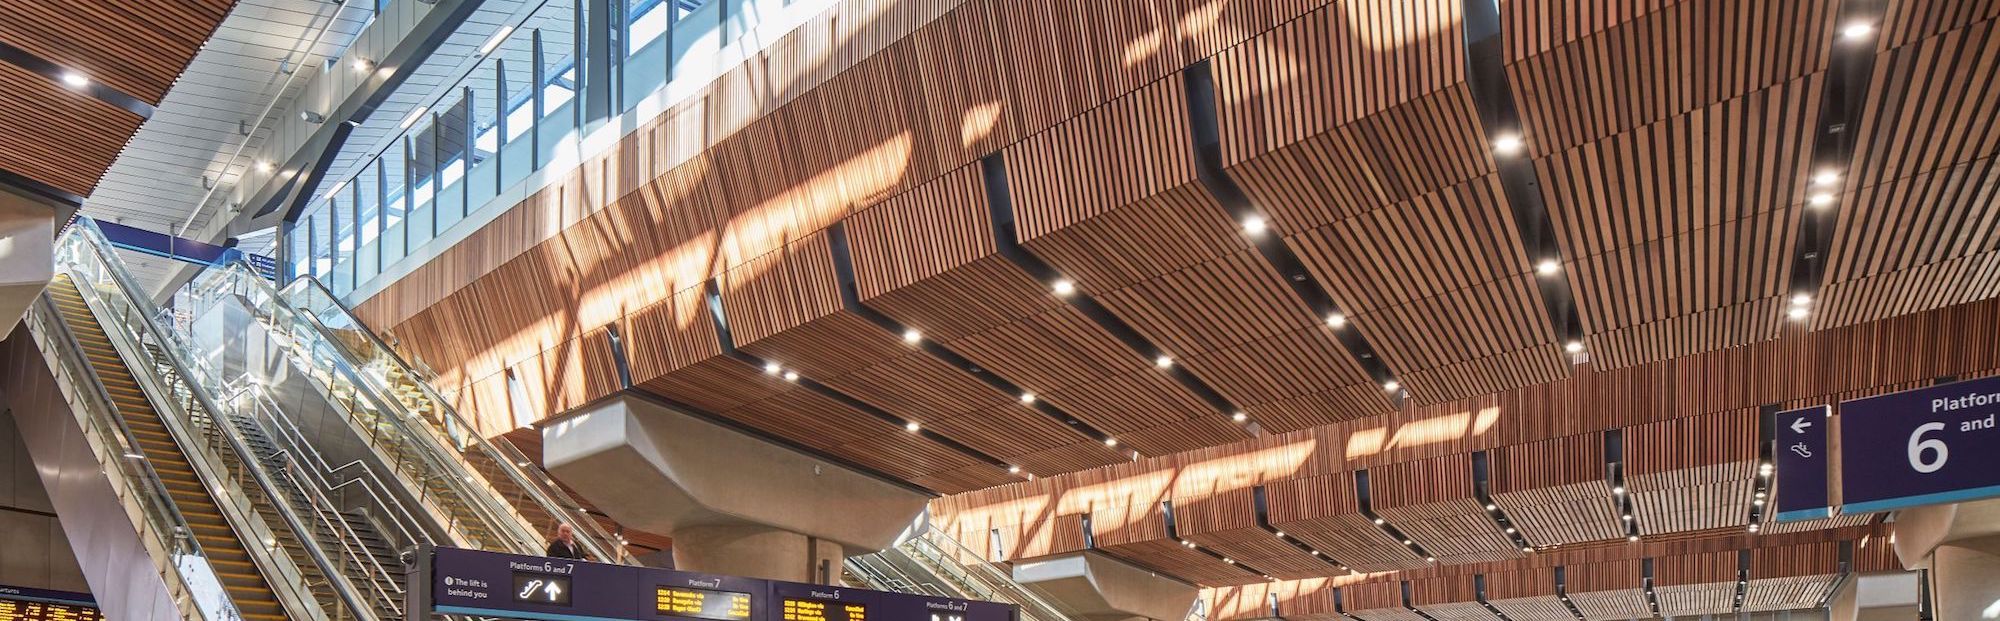 BCL Acoustic Timber Ceilings in Western Red Cedar installed at London Bridge Station concourse area